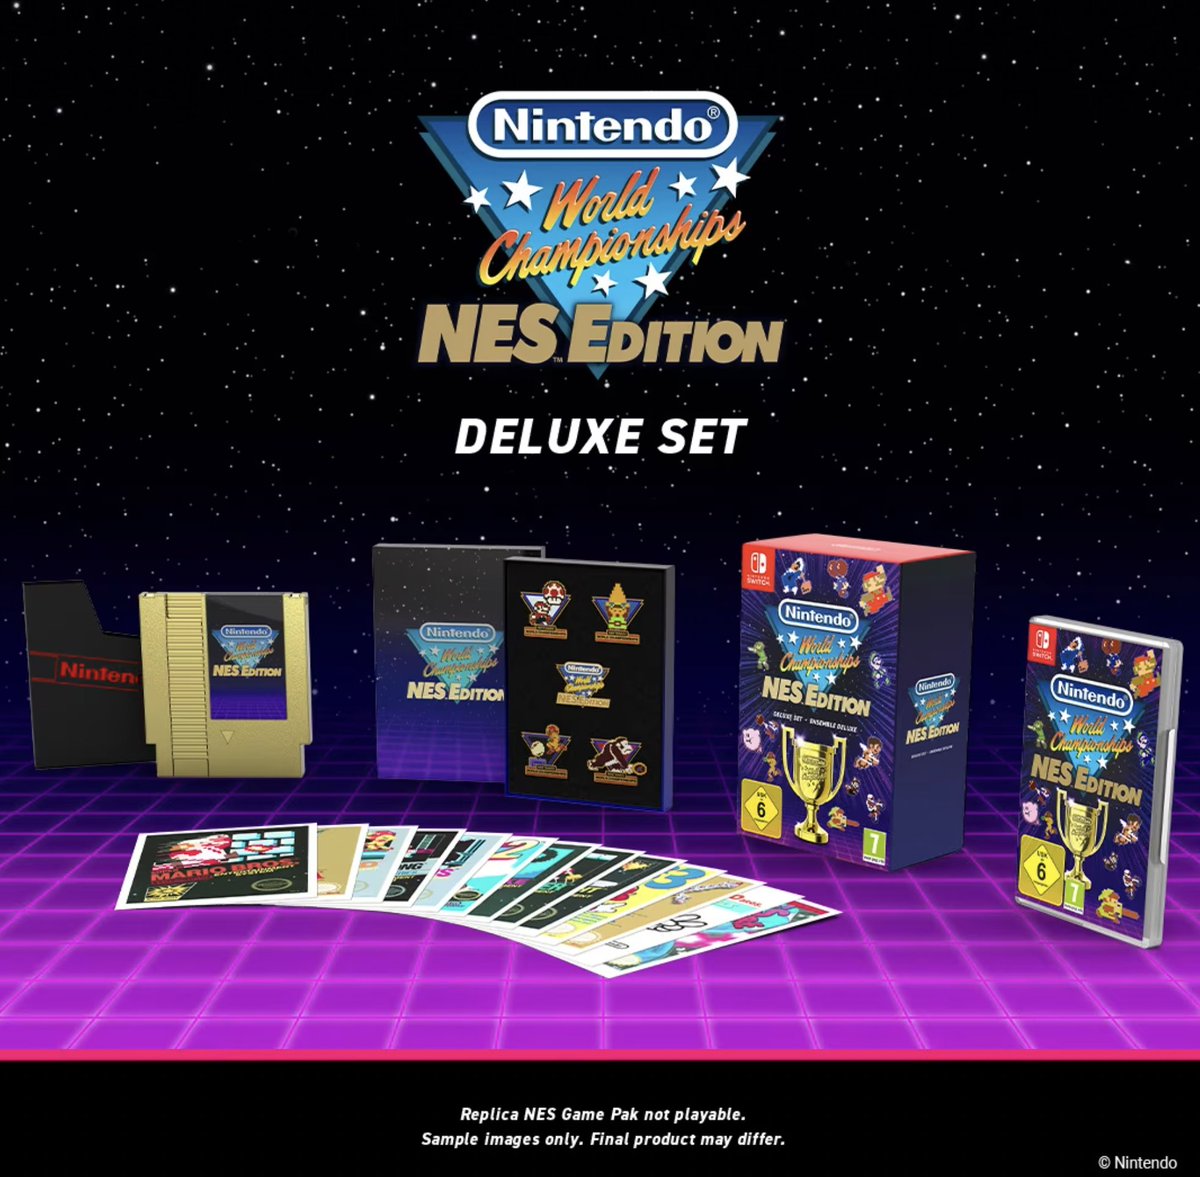 Nintendo World Championships: NES Edition Deluxe Set is now available for everyone to pre-order! It's exclusive to the My Nintendo Store – here are the links you need 👇 🇺🇸: nintendolife.com/p/26623 🇬🇧: nintendolife.com/p/26670 🇮🇪: nintendolife.com/p/26671 #NintendoSwitch #ad